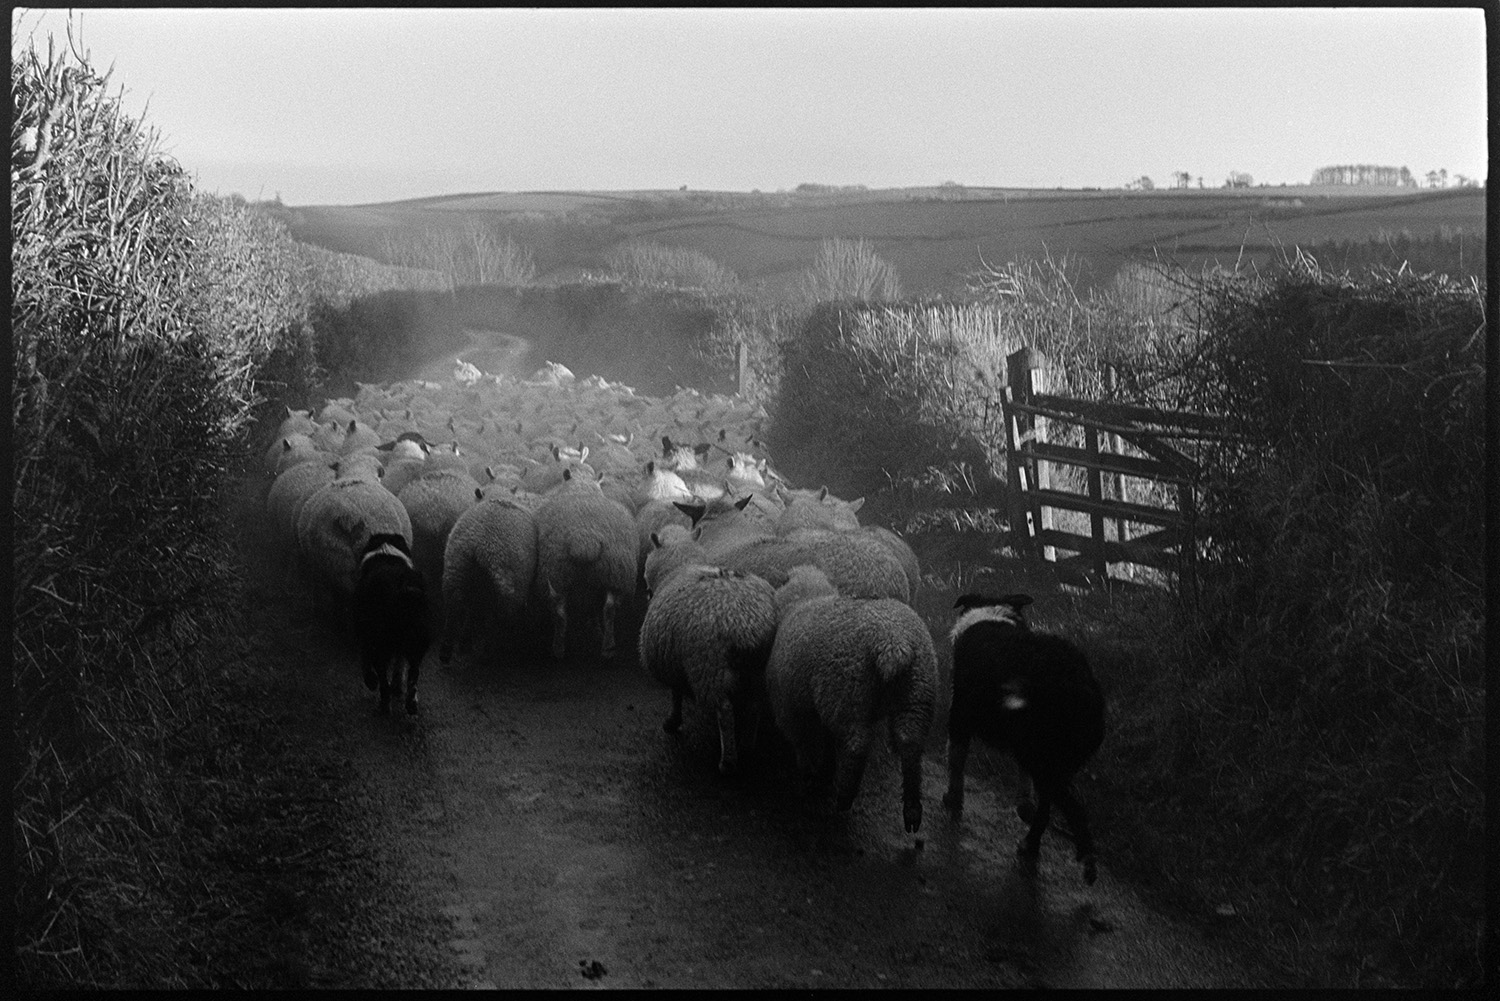 Sheep going down lane to new pasture. 
[Two dogs herding a flock of sheep down a lane with hedgerows in Chulmleigh. The sheep are going to new pasture.]